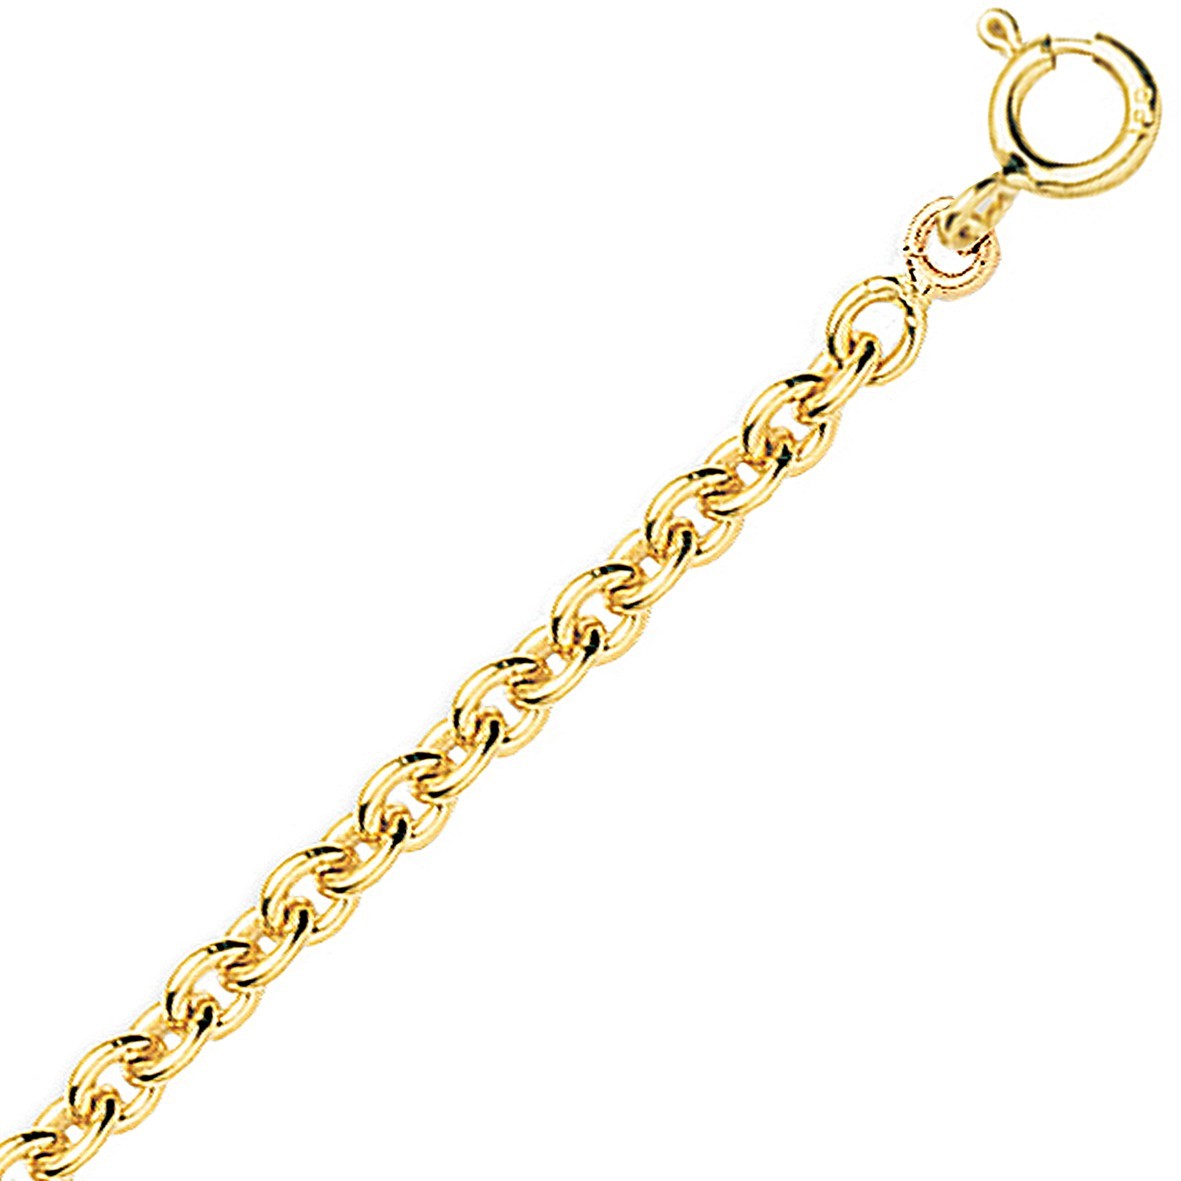 Chaine or jaune 9k maille forçat ronde 1,64mm